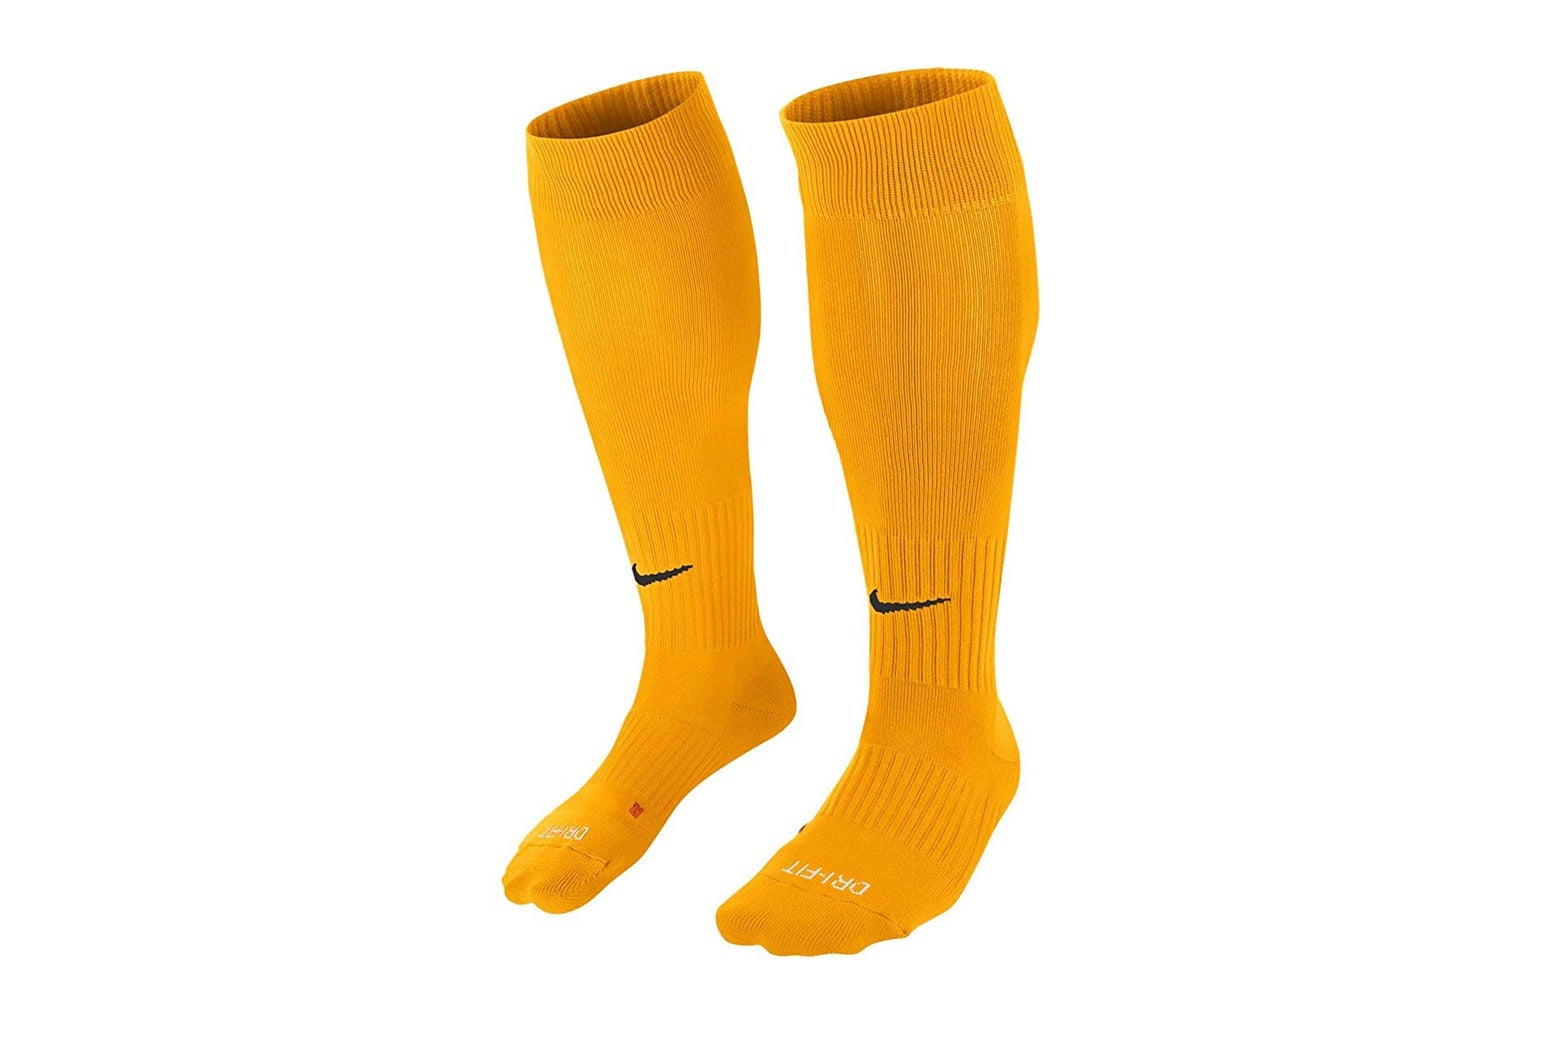 Over-the-calf athletic socks